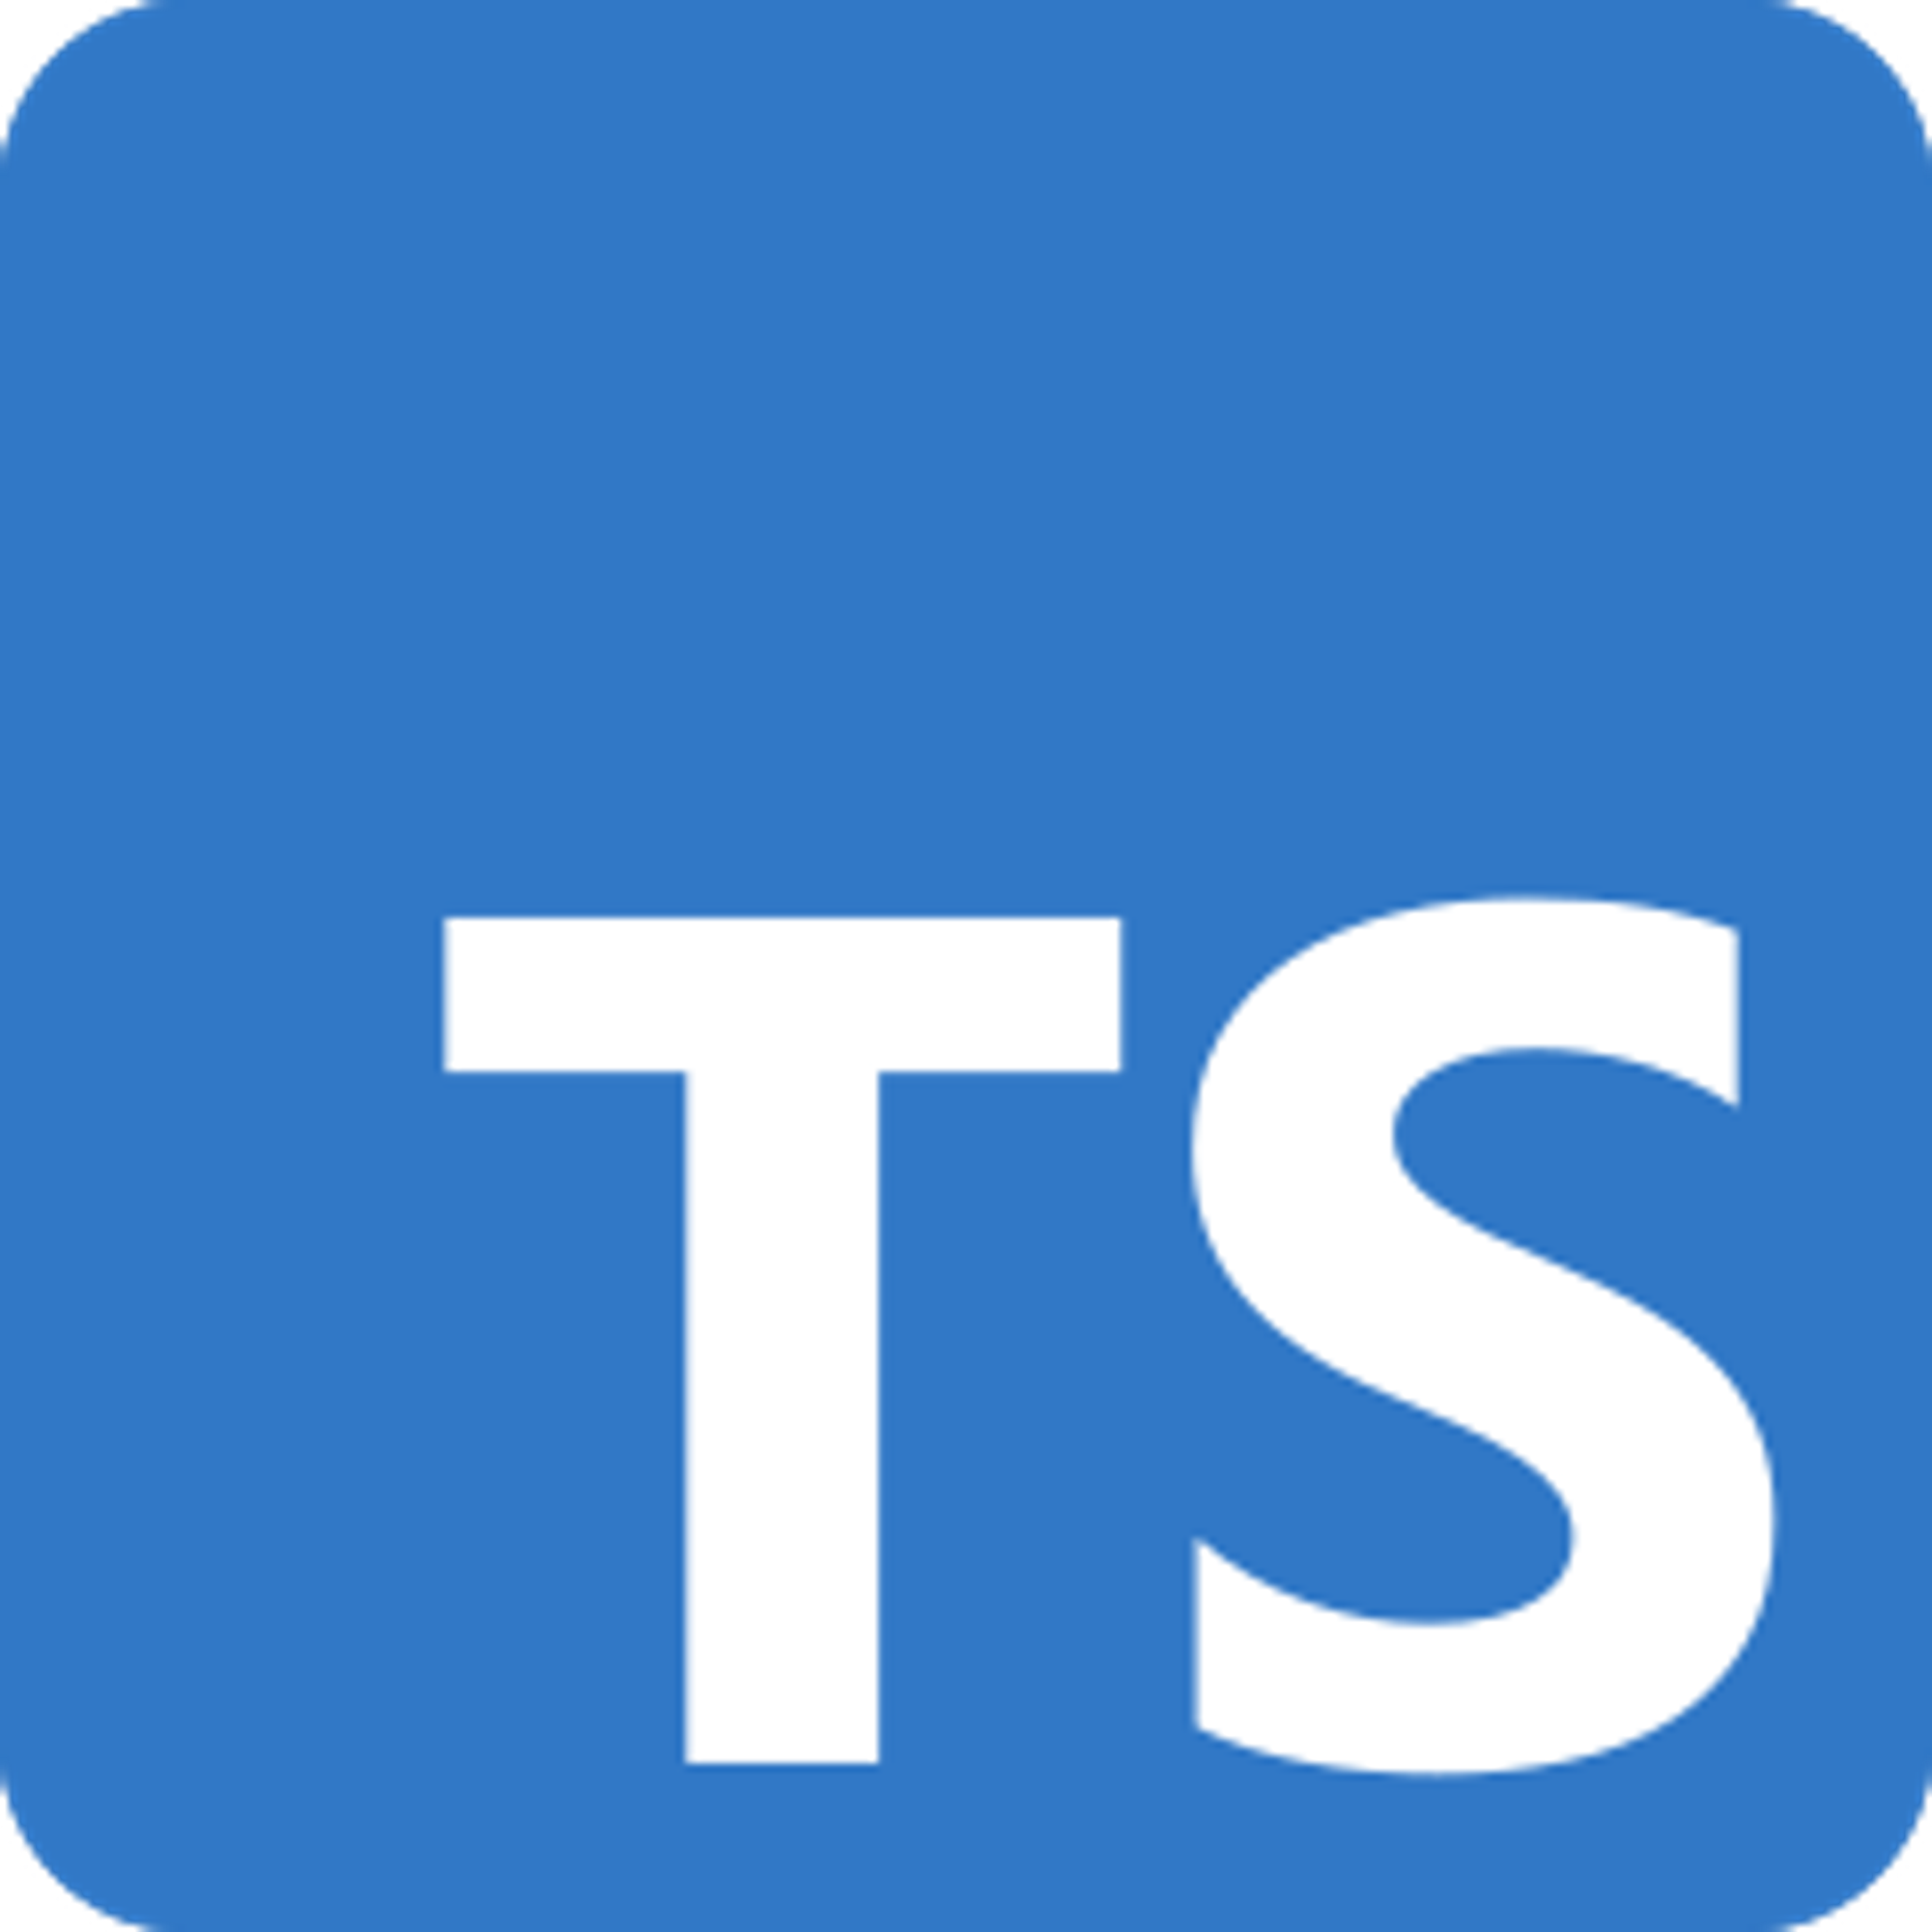 We’re hiring for exceptional TypeScript developers.